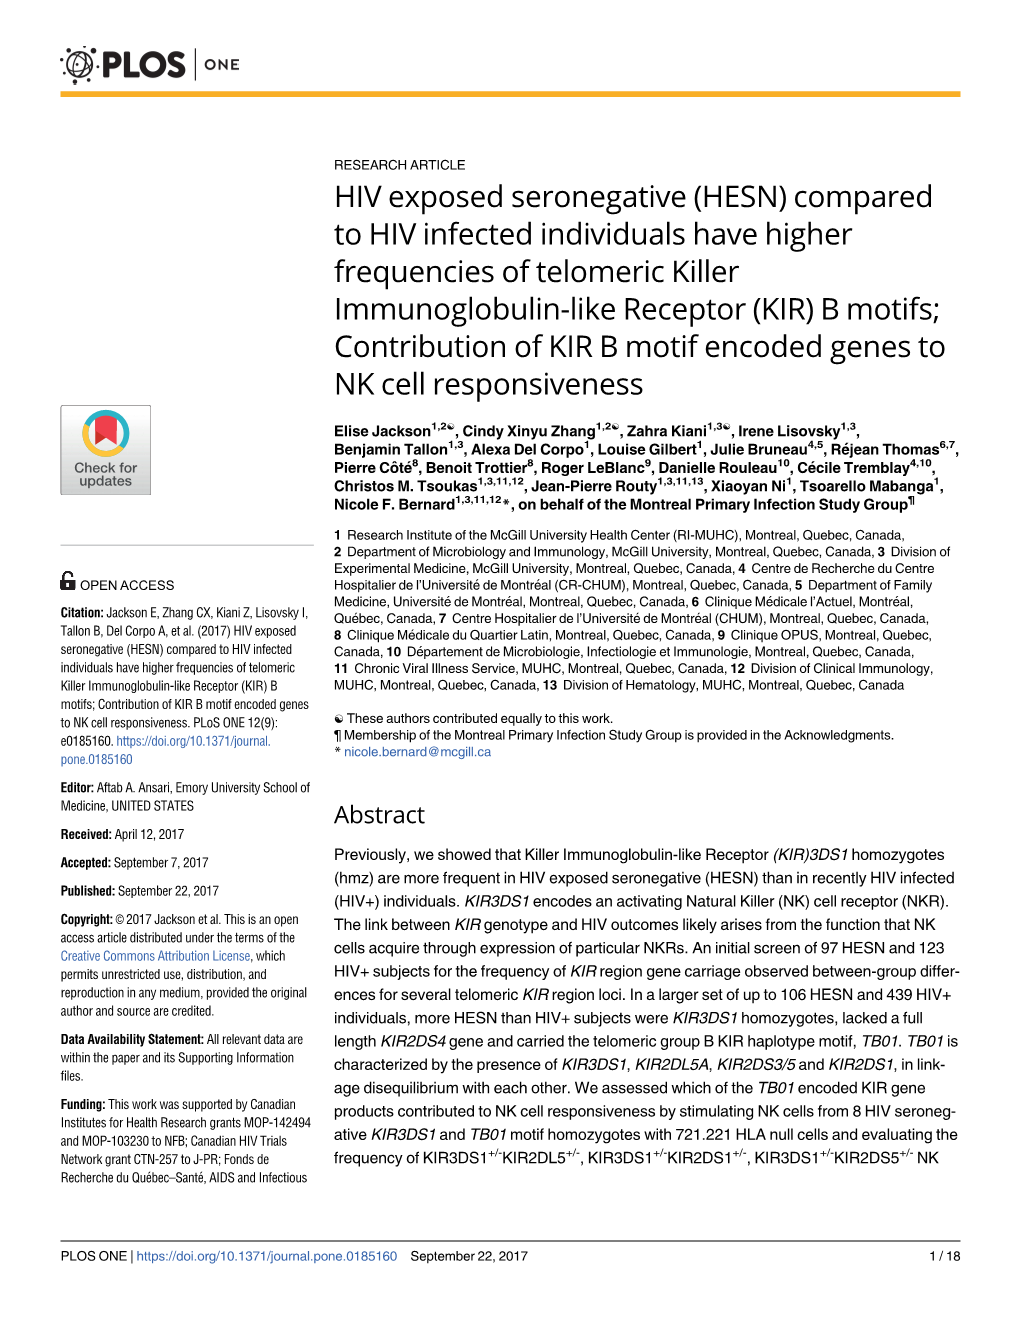 HIV Exposed Seronegative (HESN) Compared to HIV Infected